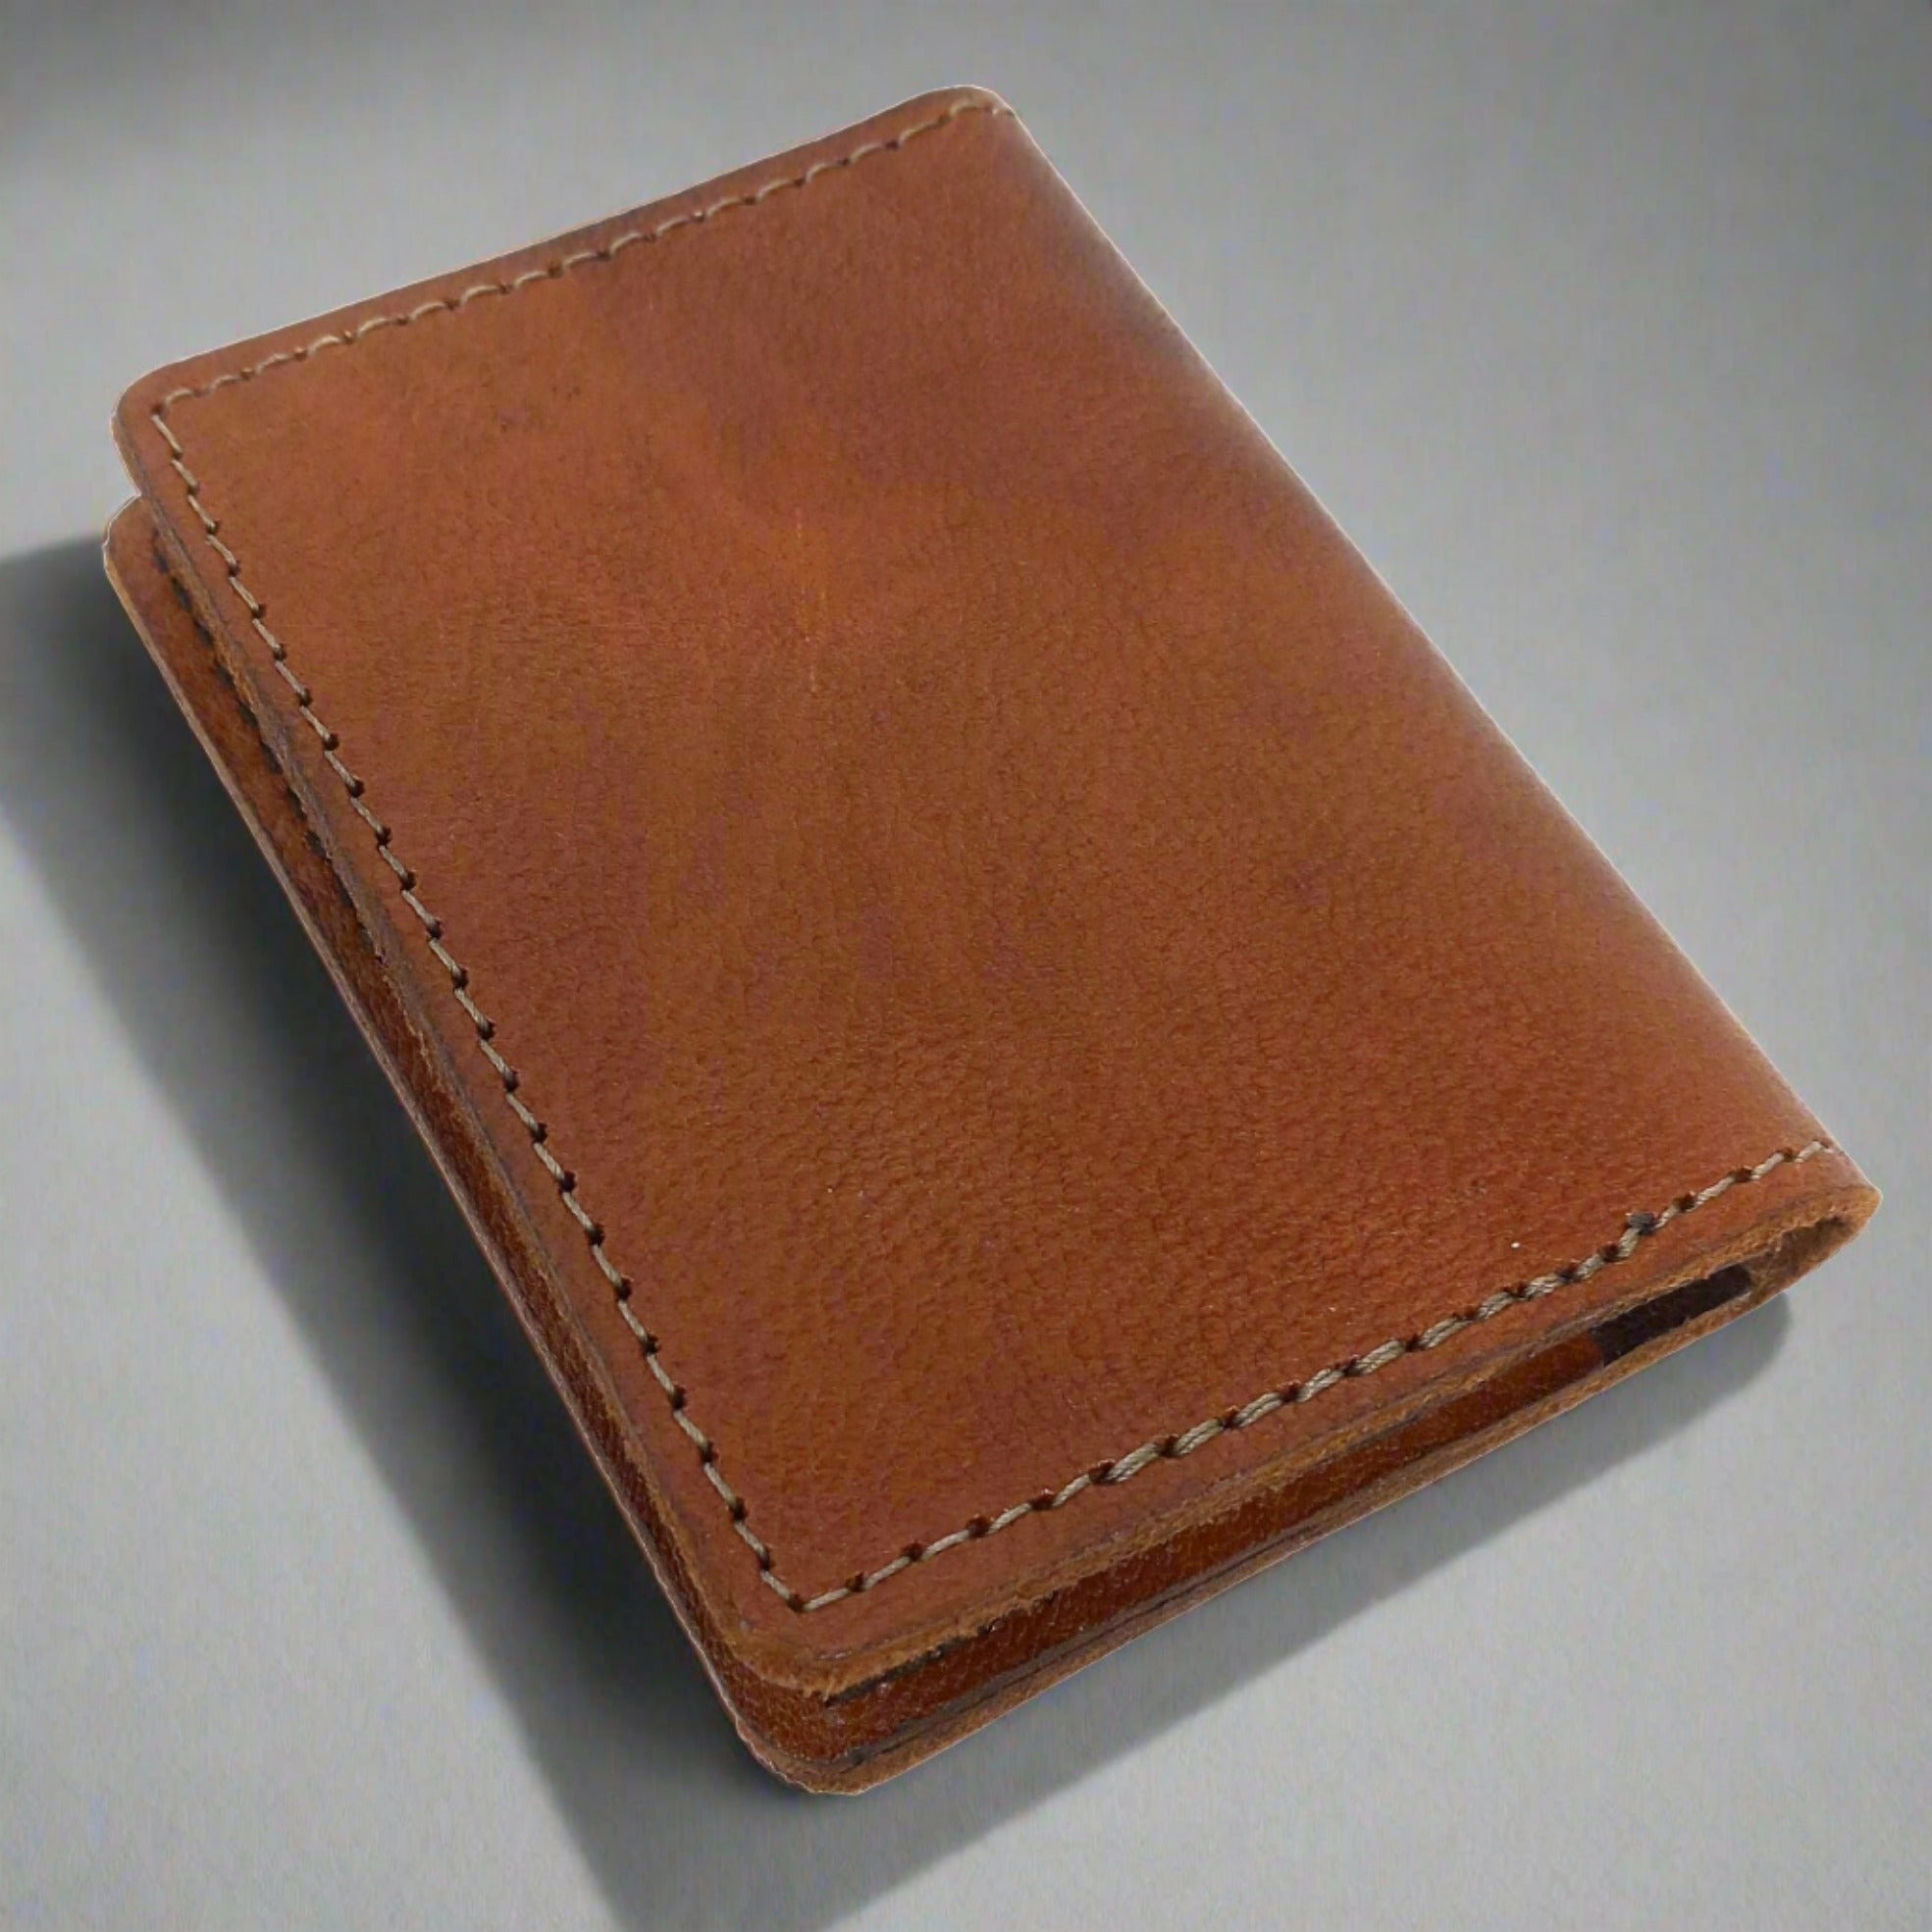 Classic handcrafted leather card holder folded wallet